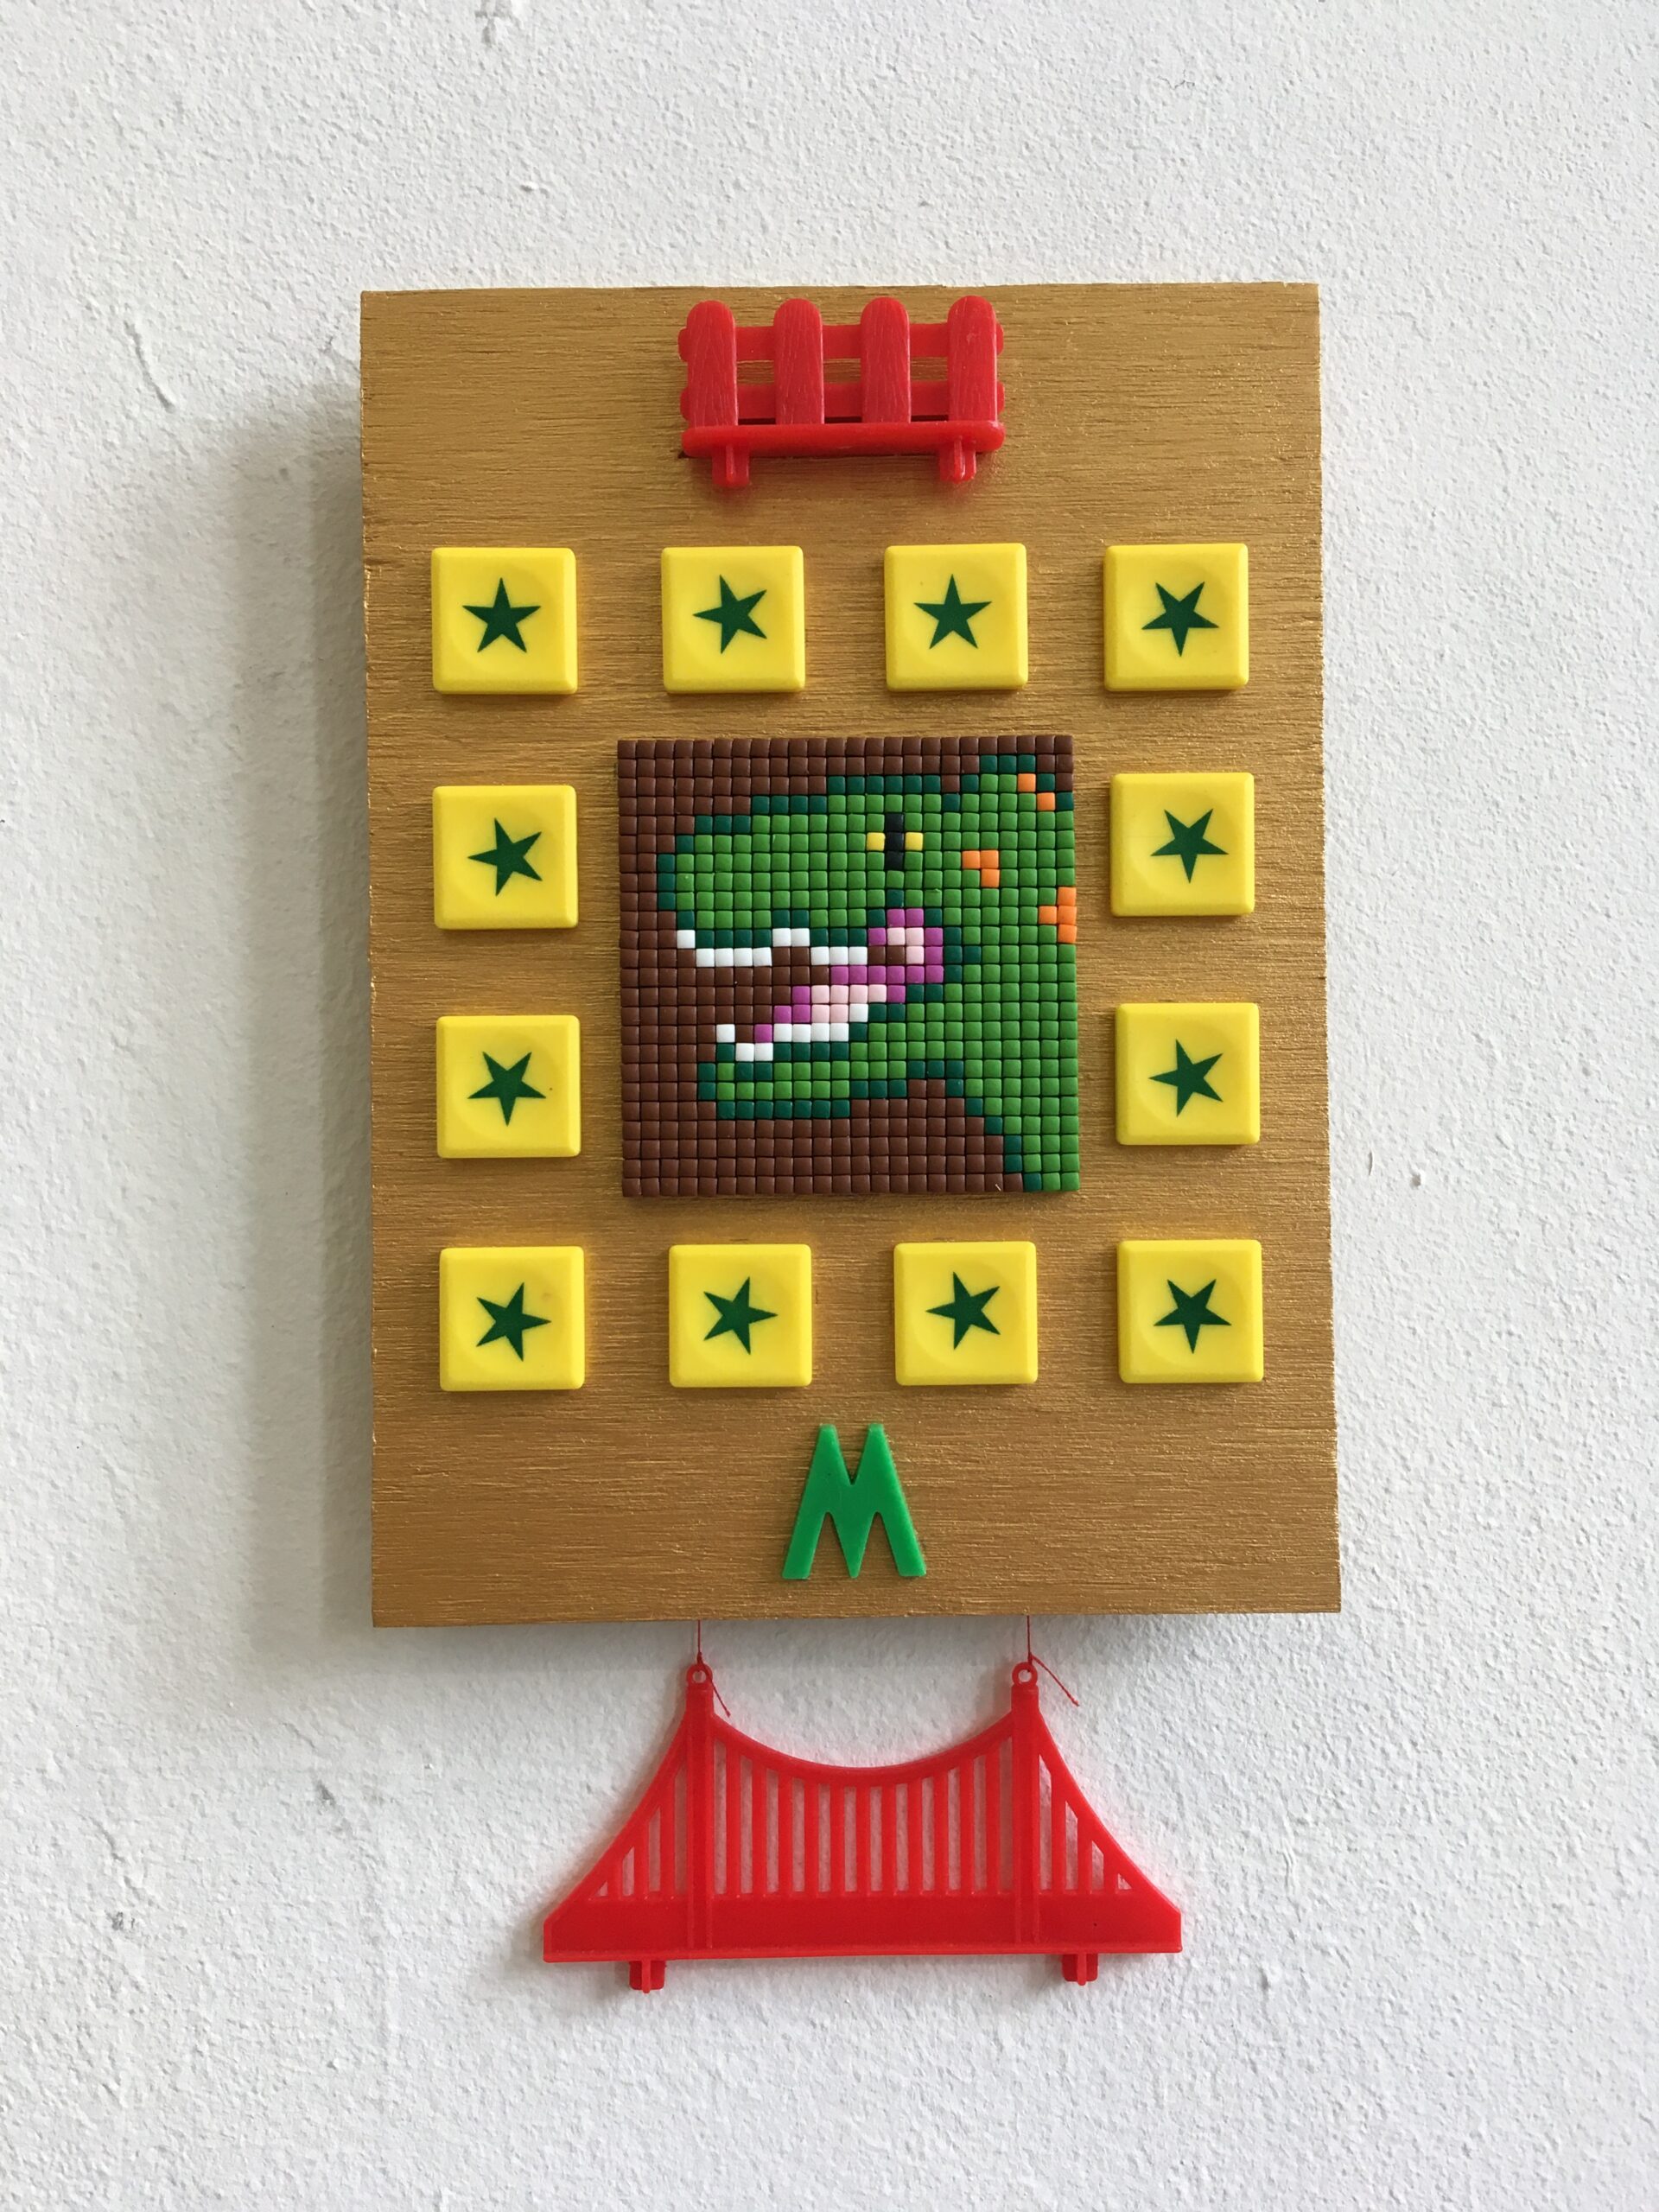 Mike was e great dinosaur, 13x23cm, assembly of plastic and toys